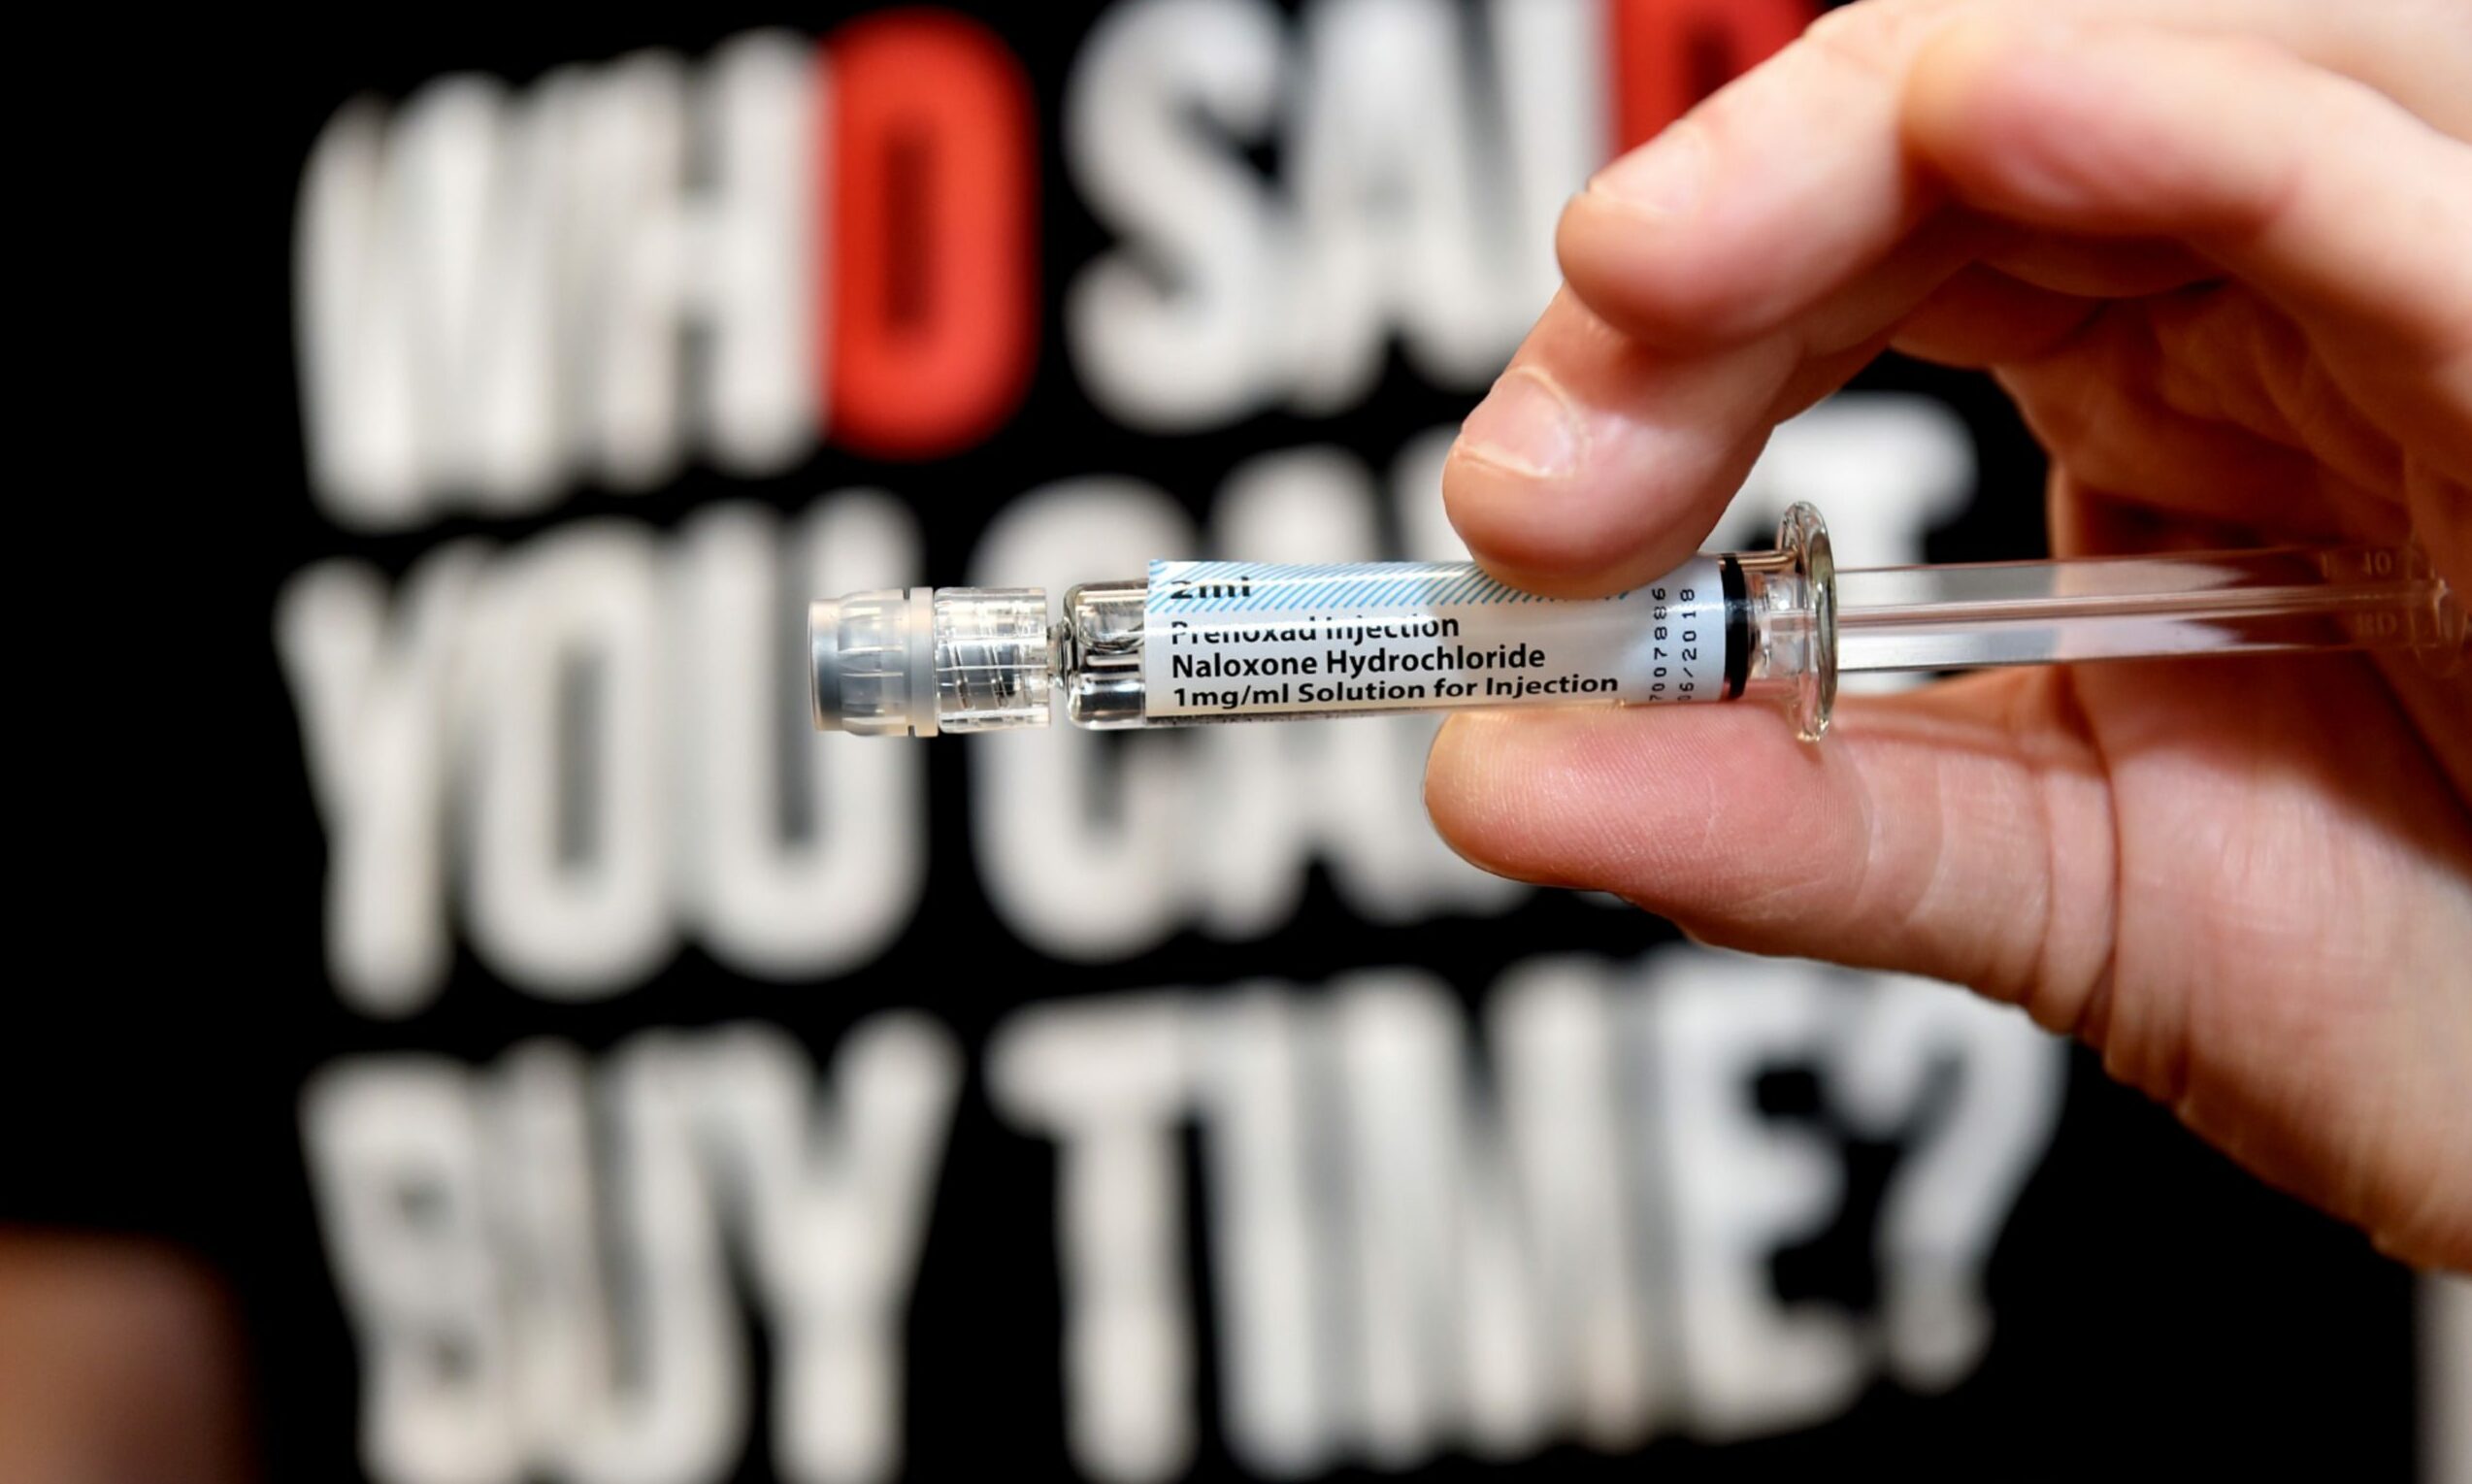 Naloxone, which can help reverse opioid overdoses. Picture by Scott Baxter.